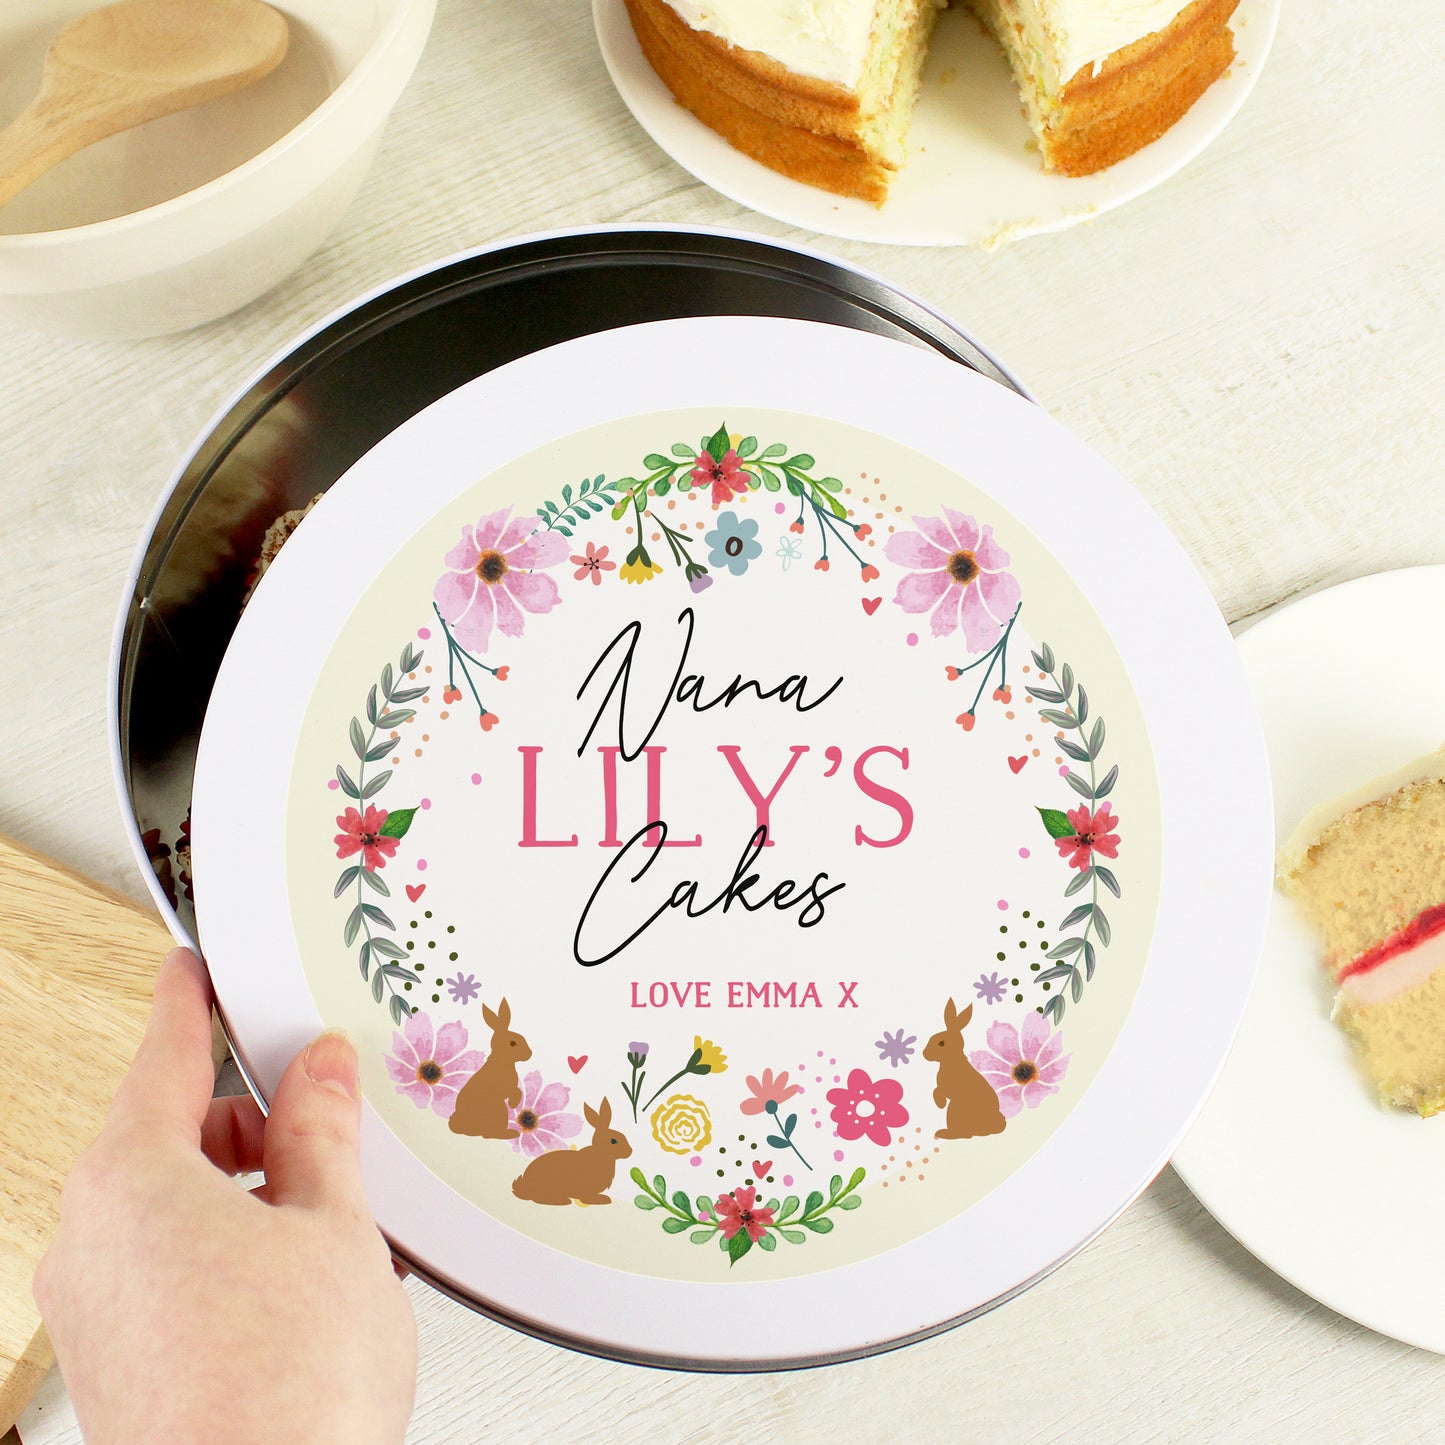 A hand is holding the tin cover of Personalised Floral Cake Tin that says "Nana LILY'D Cakes LOVE EMMA X"